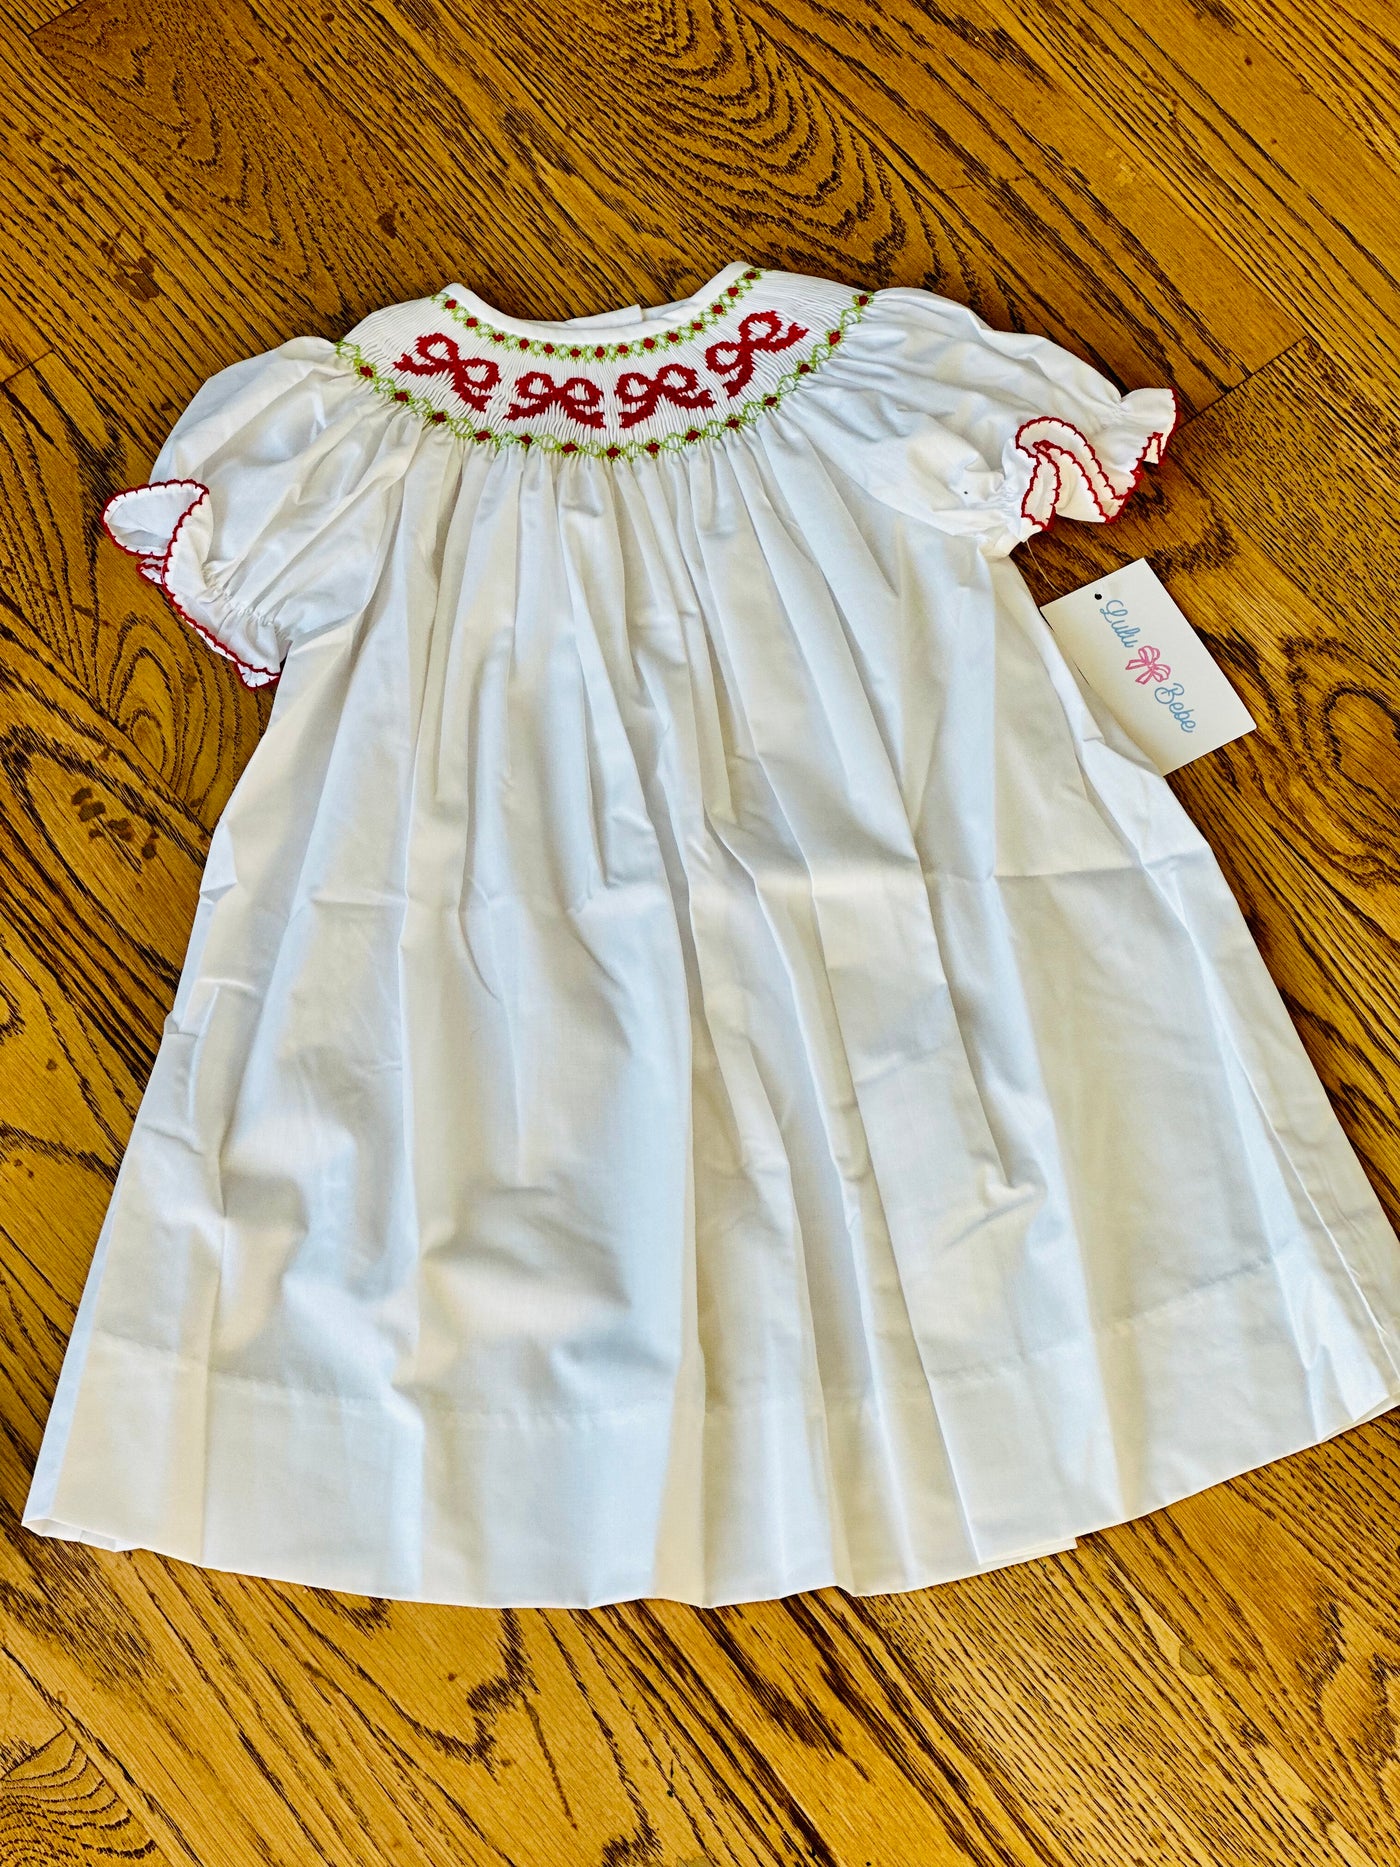 Smocked Bishop Dress w/ Red Holiday Bow